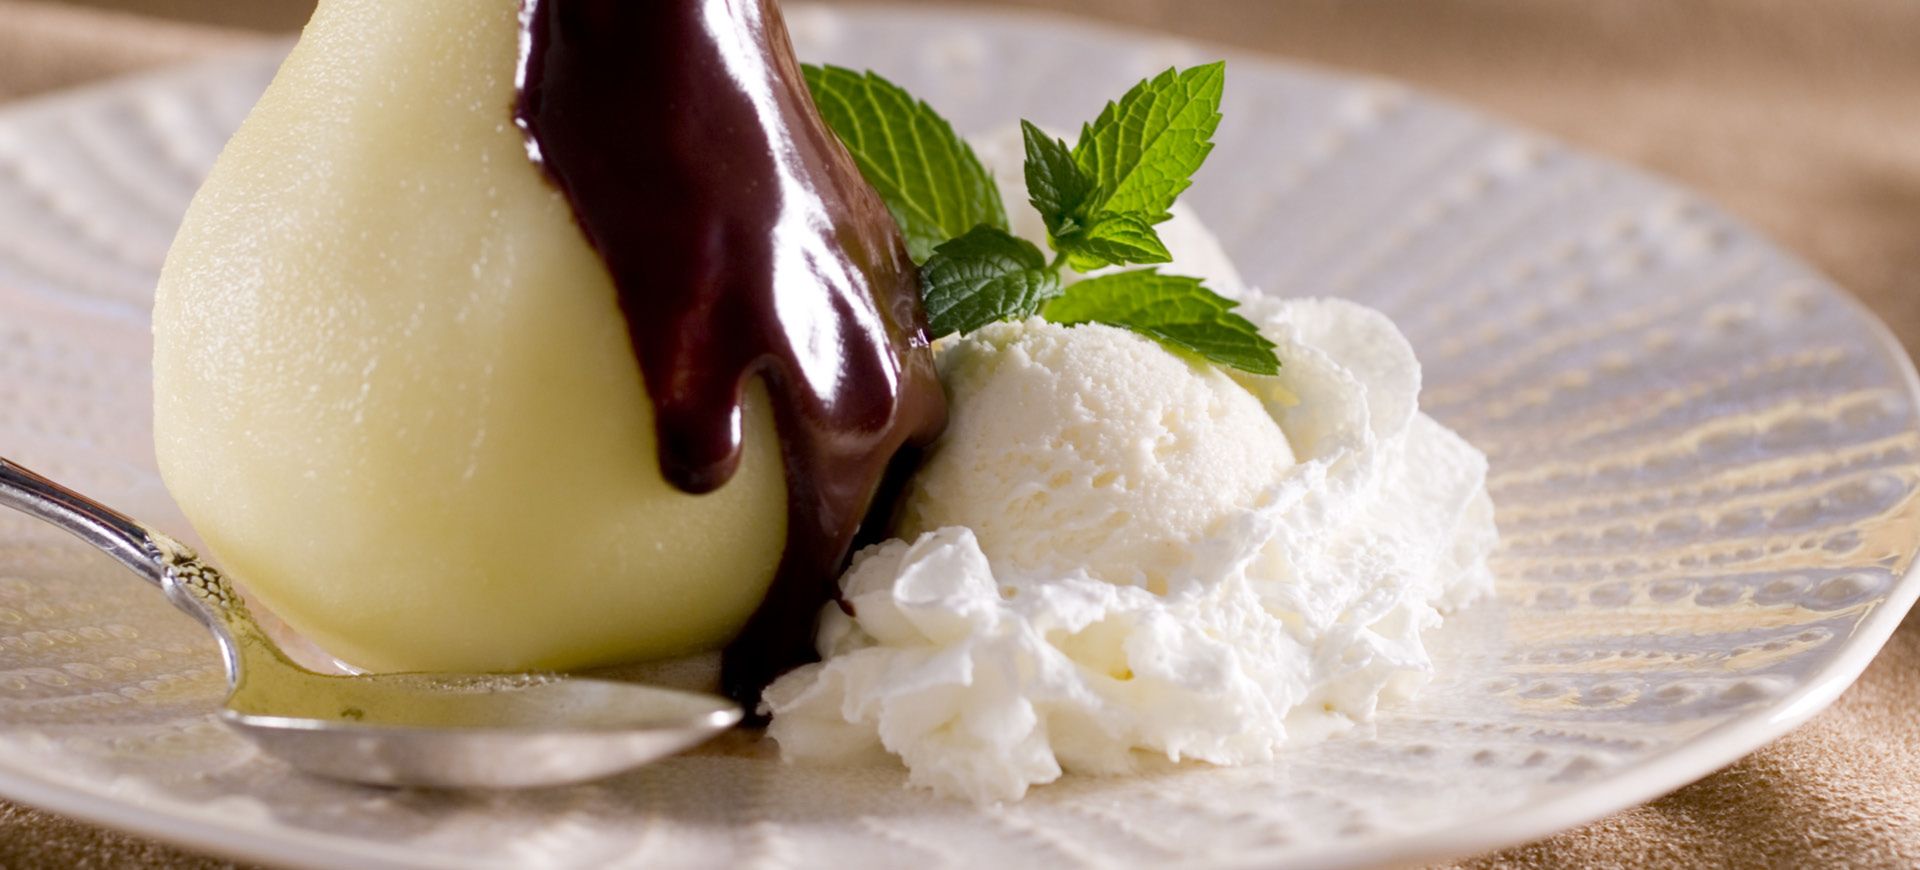 Poached Pears with Chocolate Drizzle